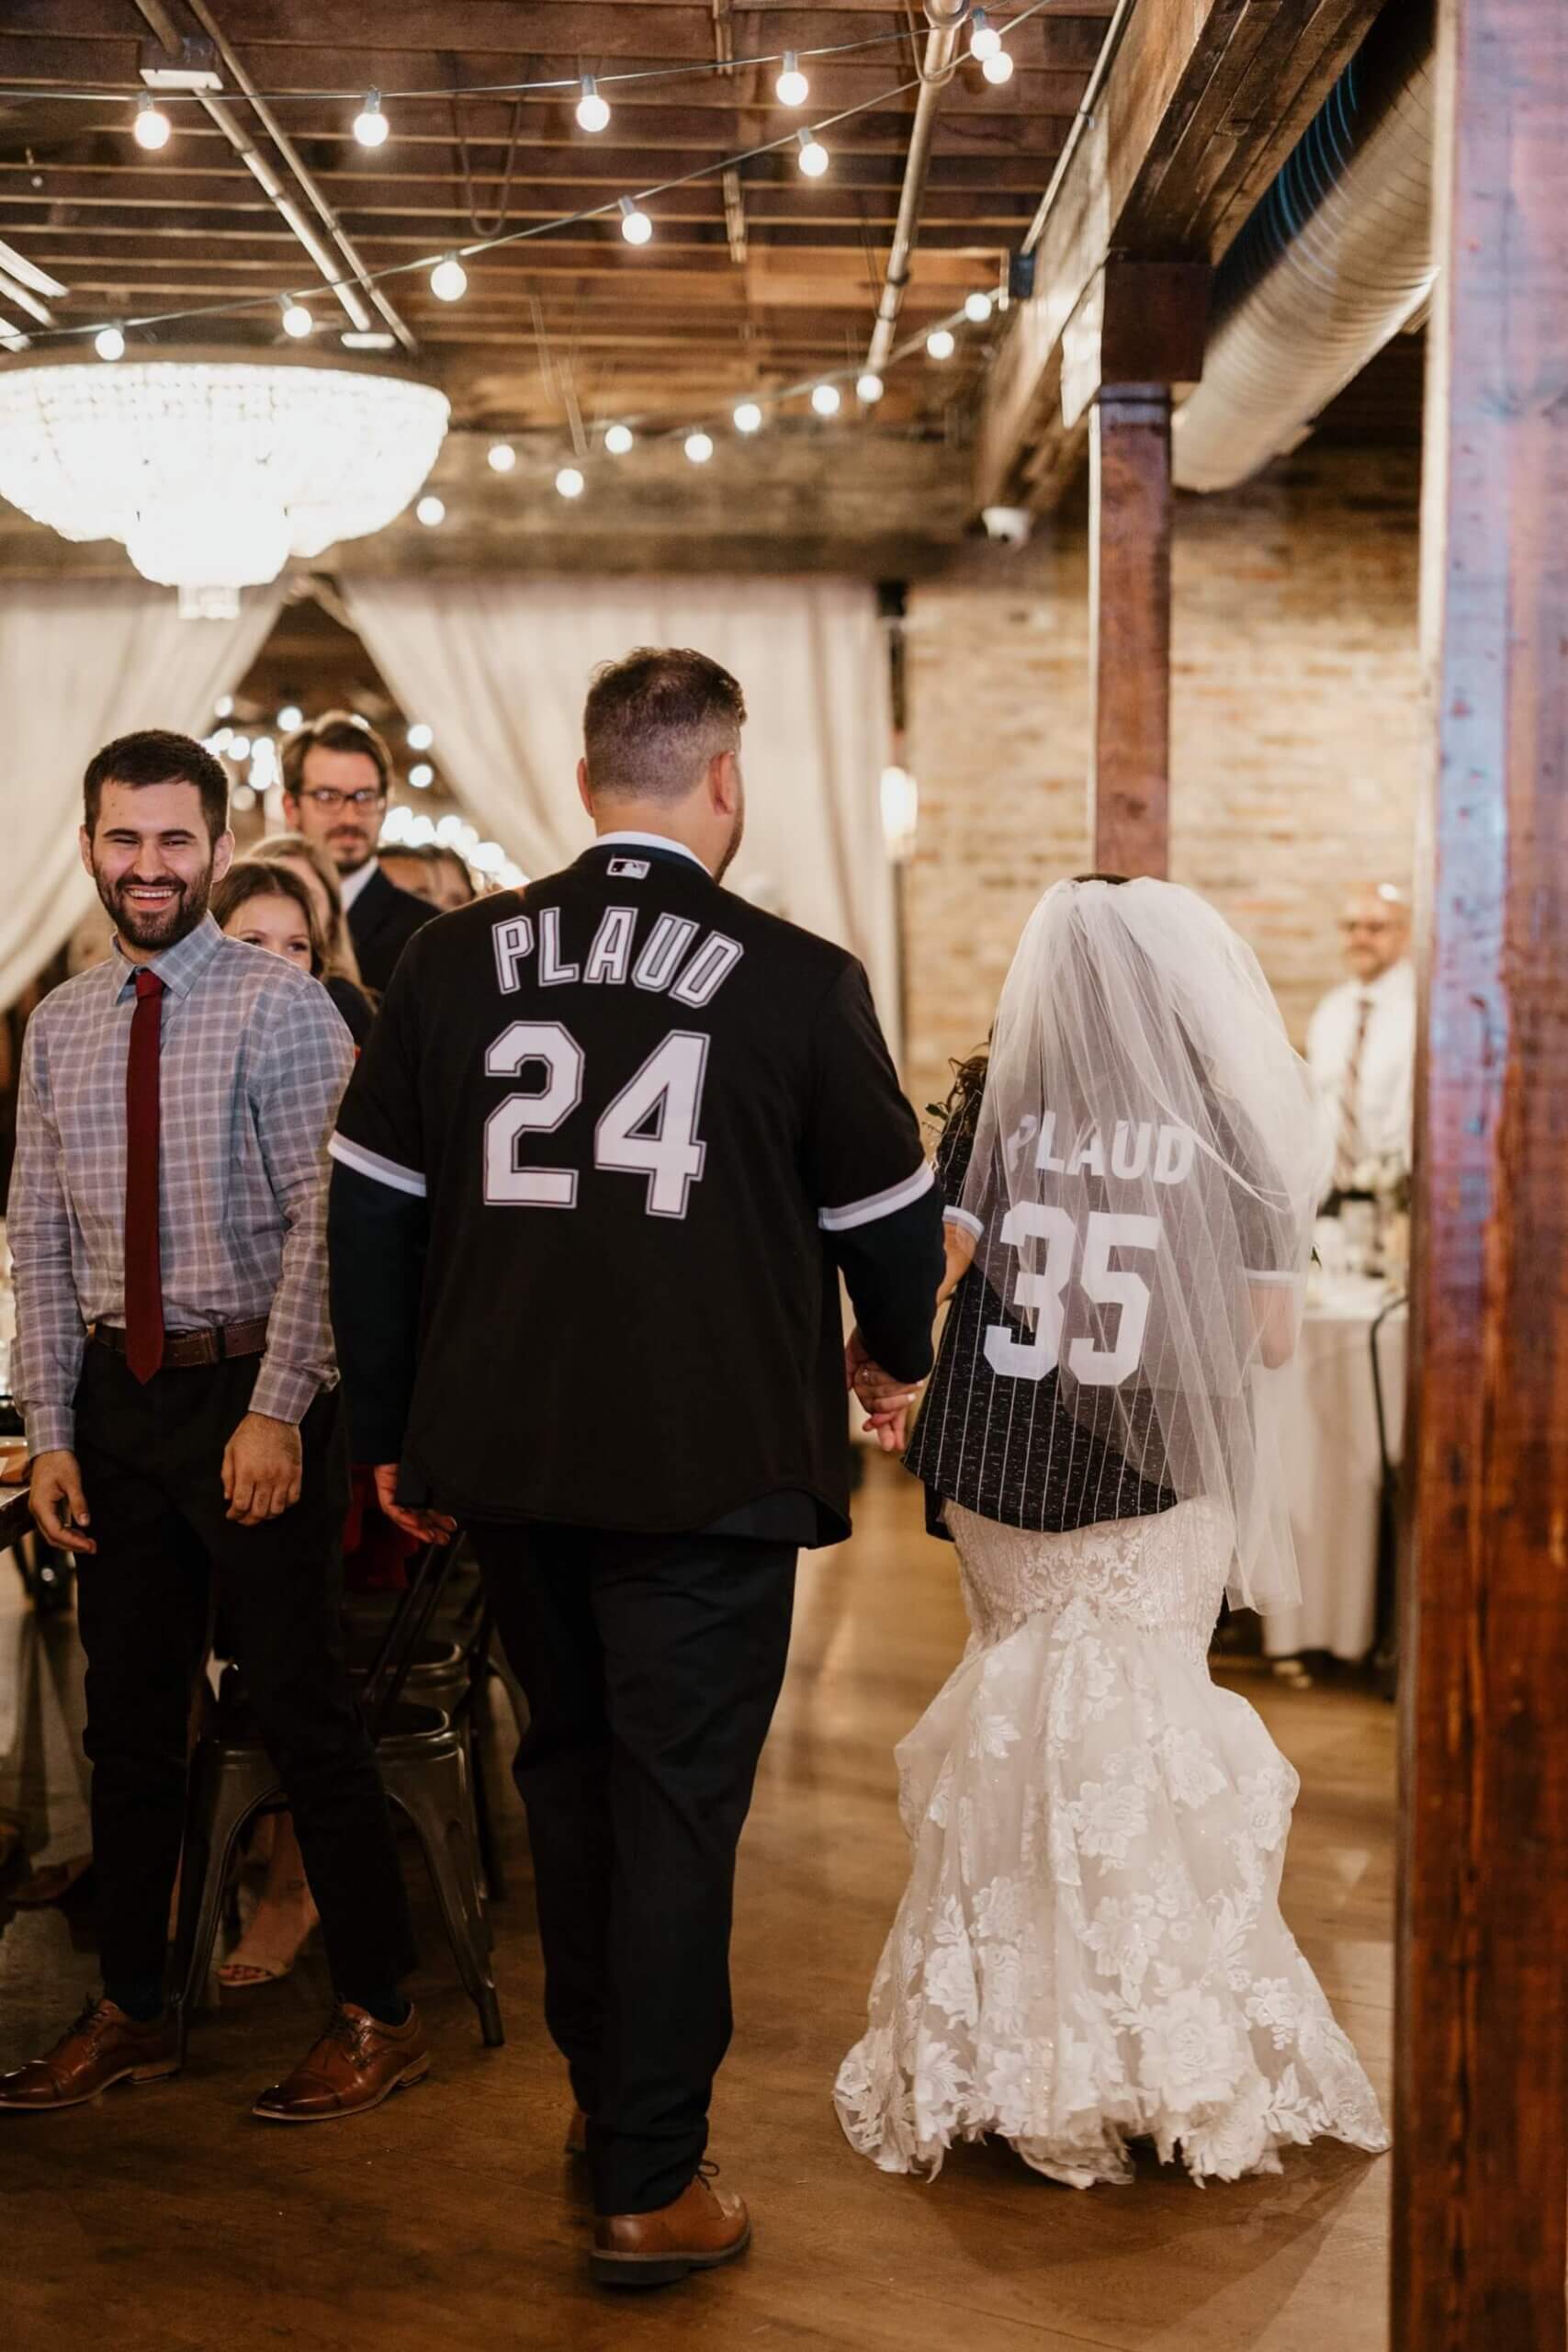 Bride and groom in custom White Sox jerseys entering wedding reception at The Haight